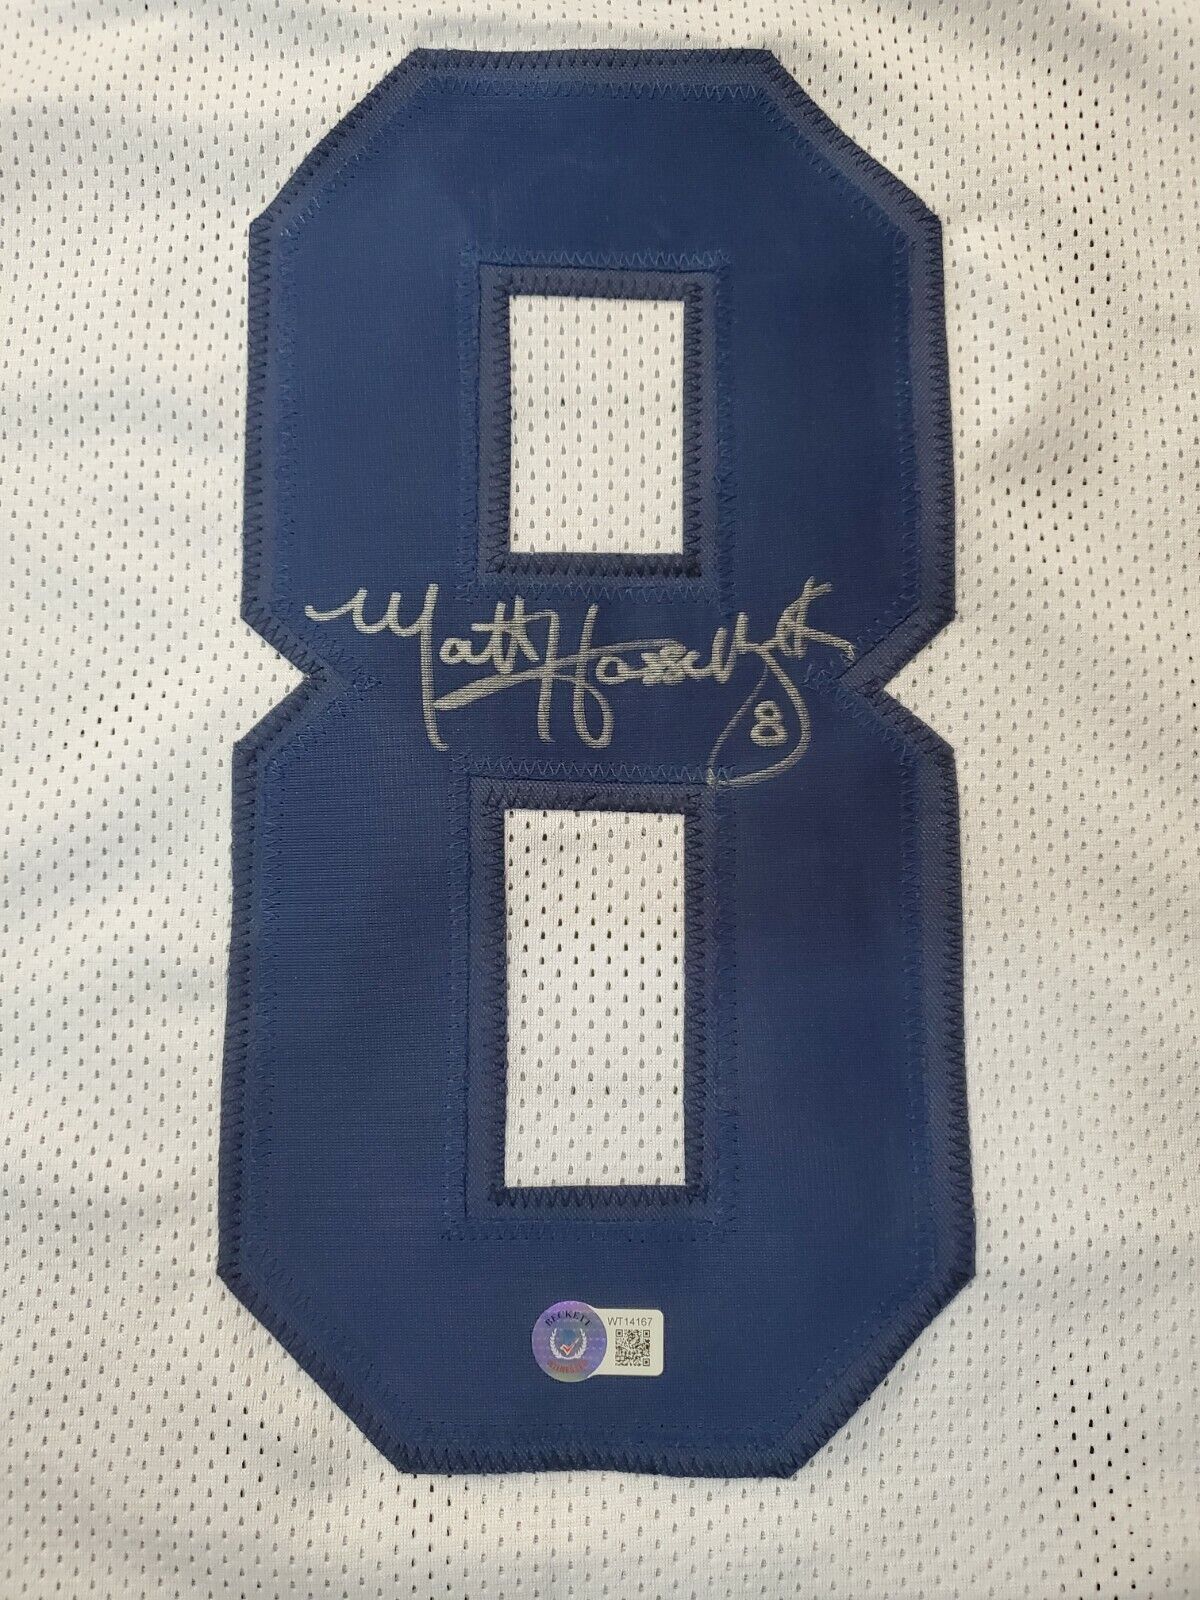 MVP Authentics Seattle Seahawks Matt Hasselbeck Autographed Signed Jersey Bas Holo 135 sports jersey framing , jersey framing